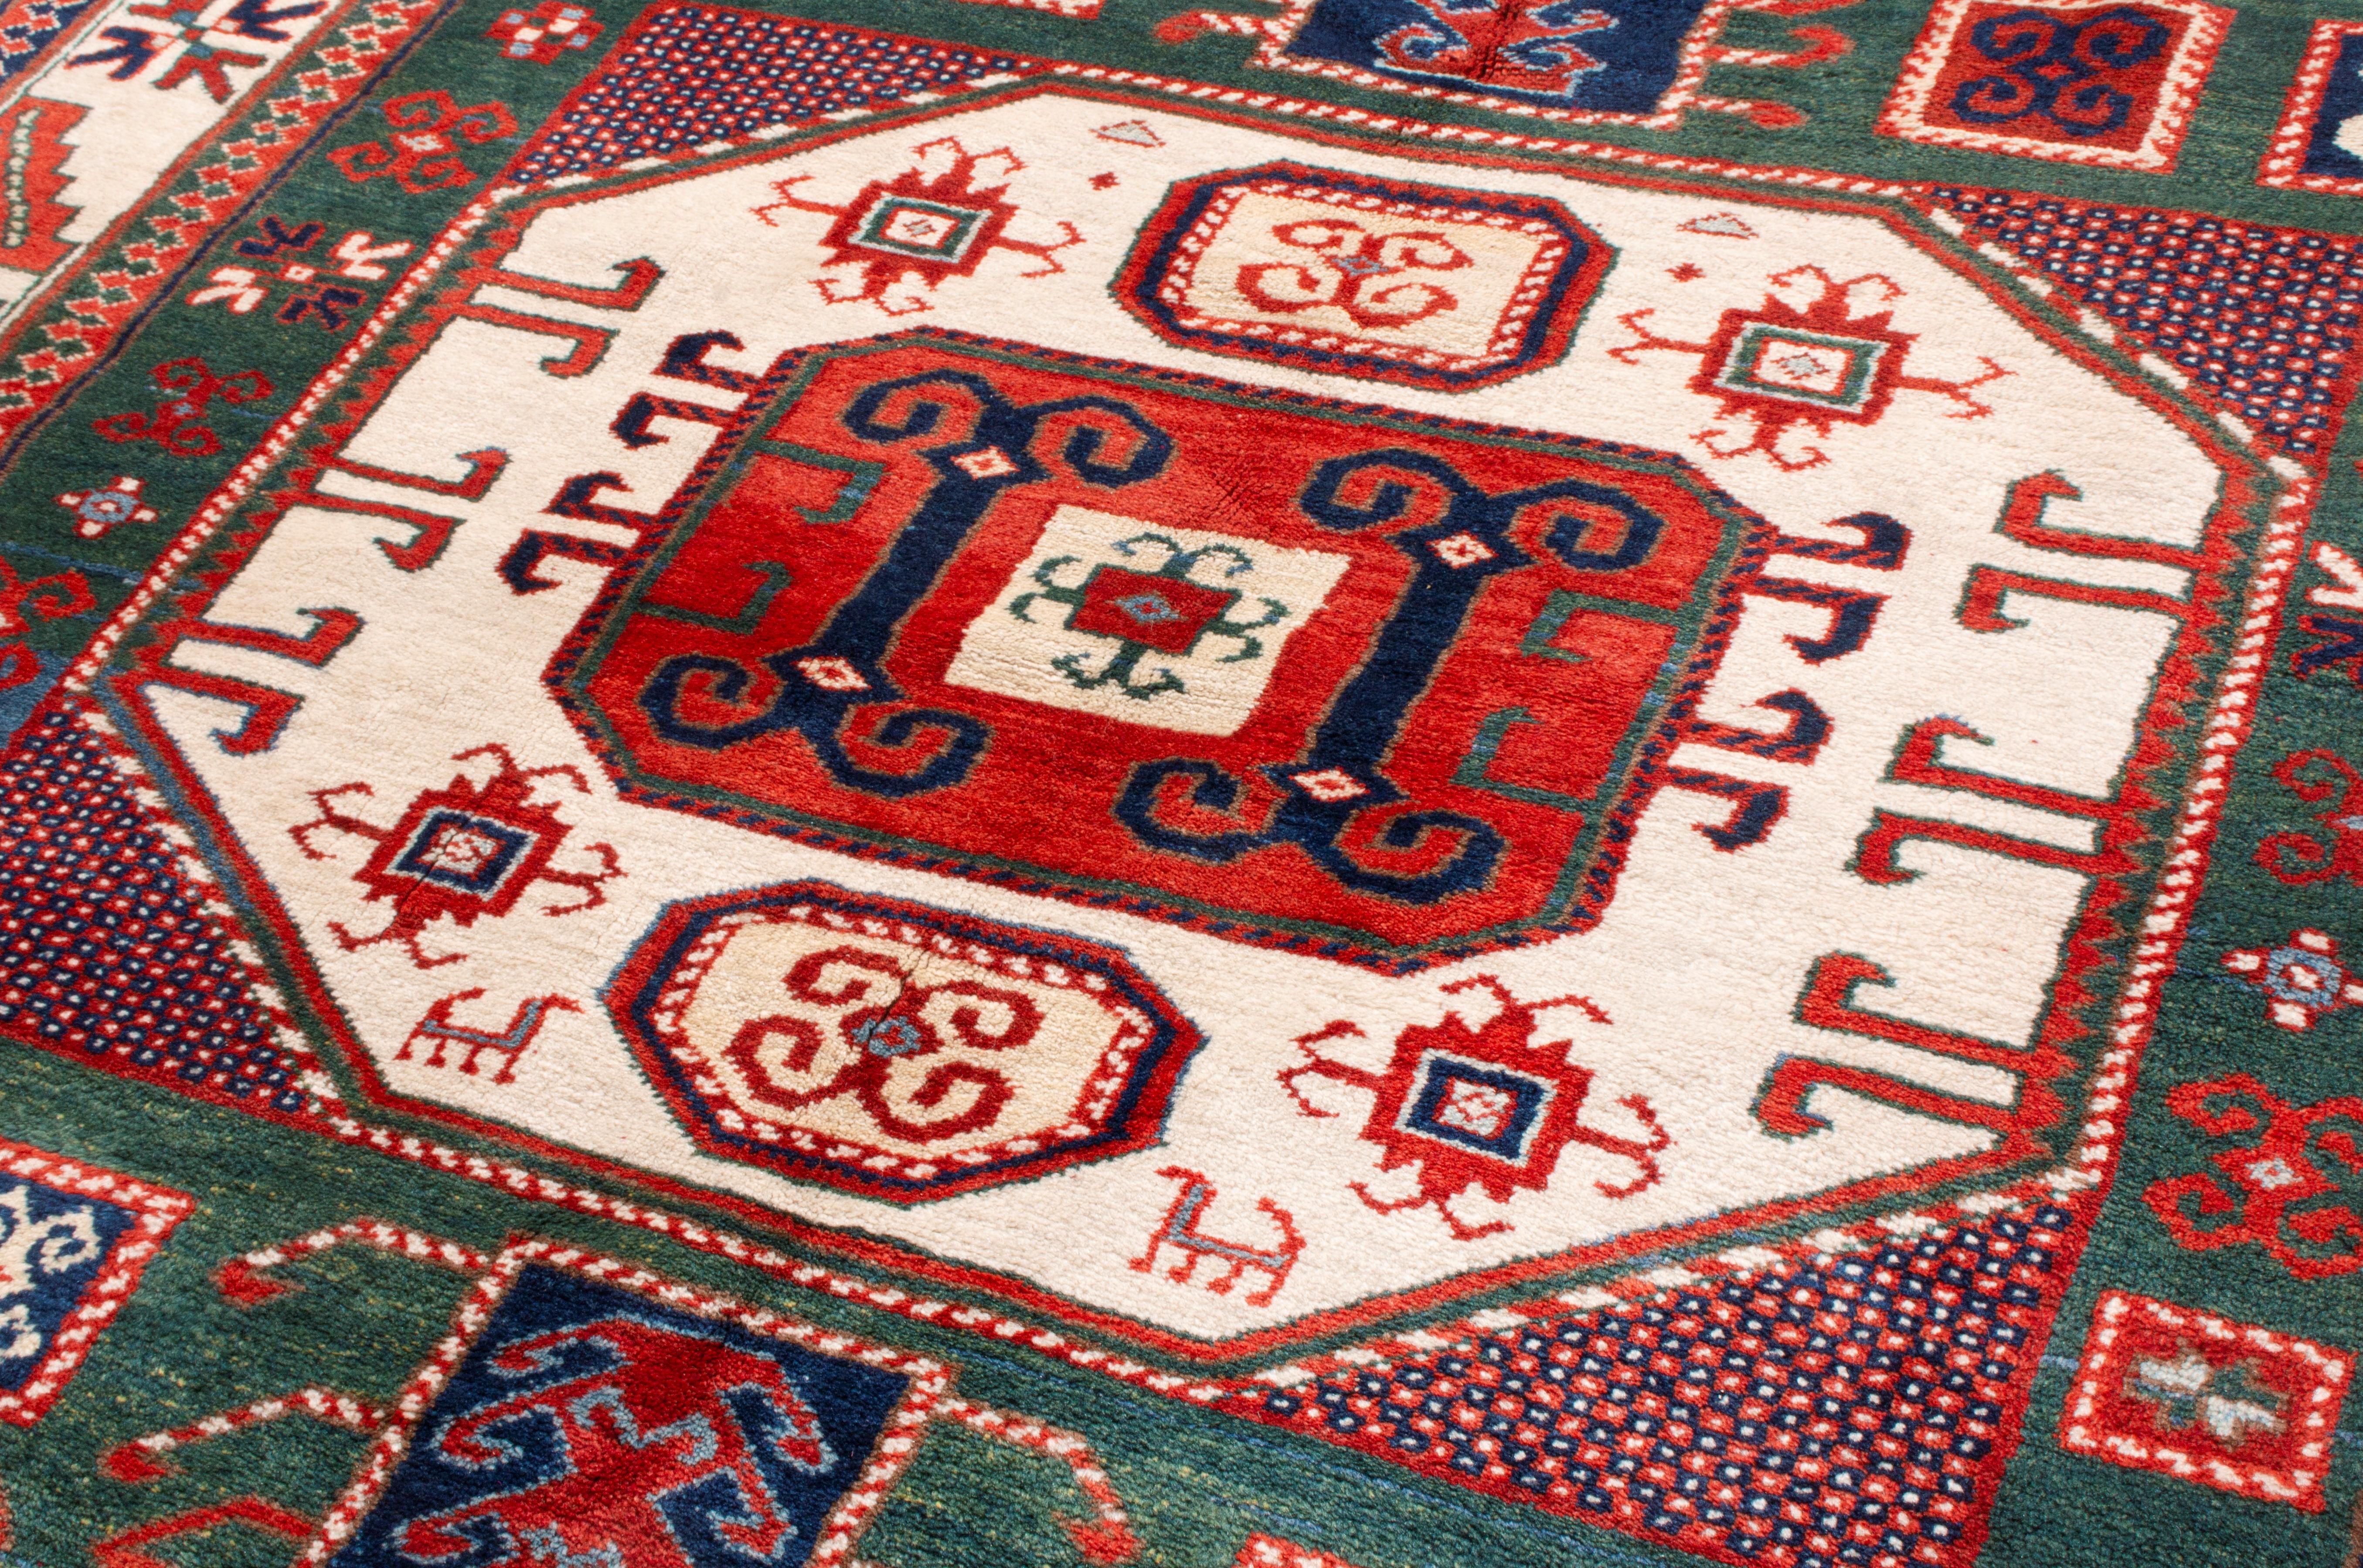 Turc Rug & Kilim's New Kazak Transitional Red and Green Wool Rug with Horn Motifs (en anglais seulement) en vente